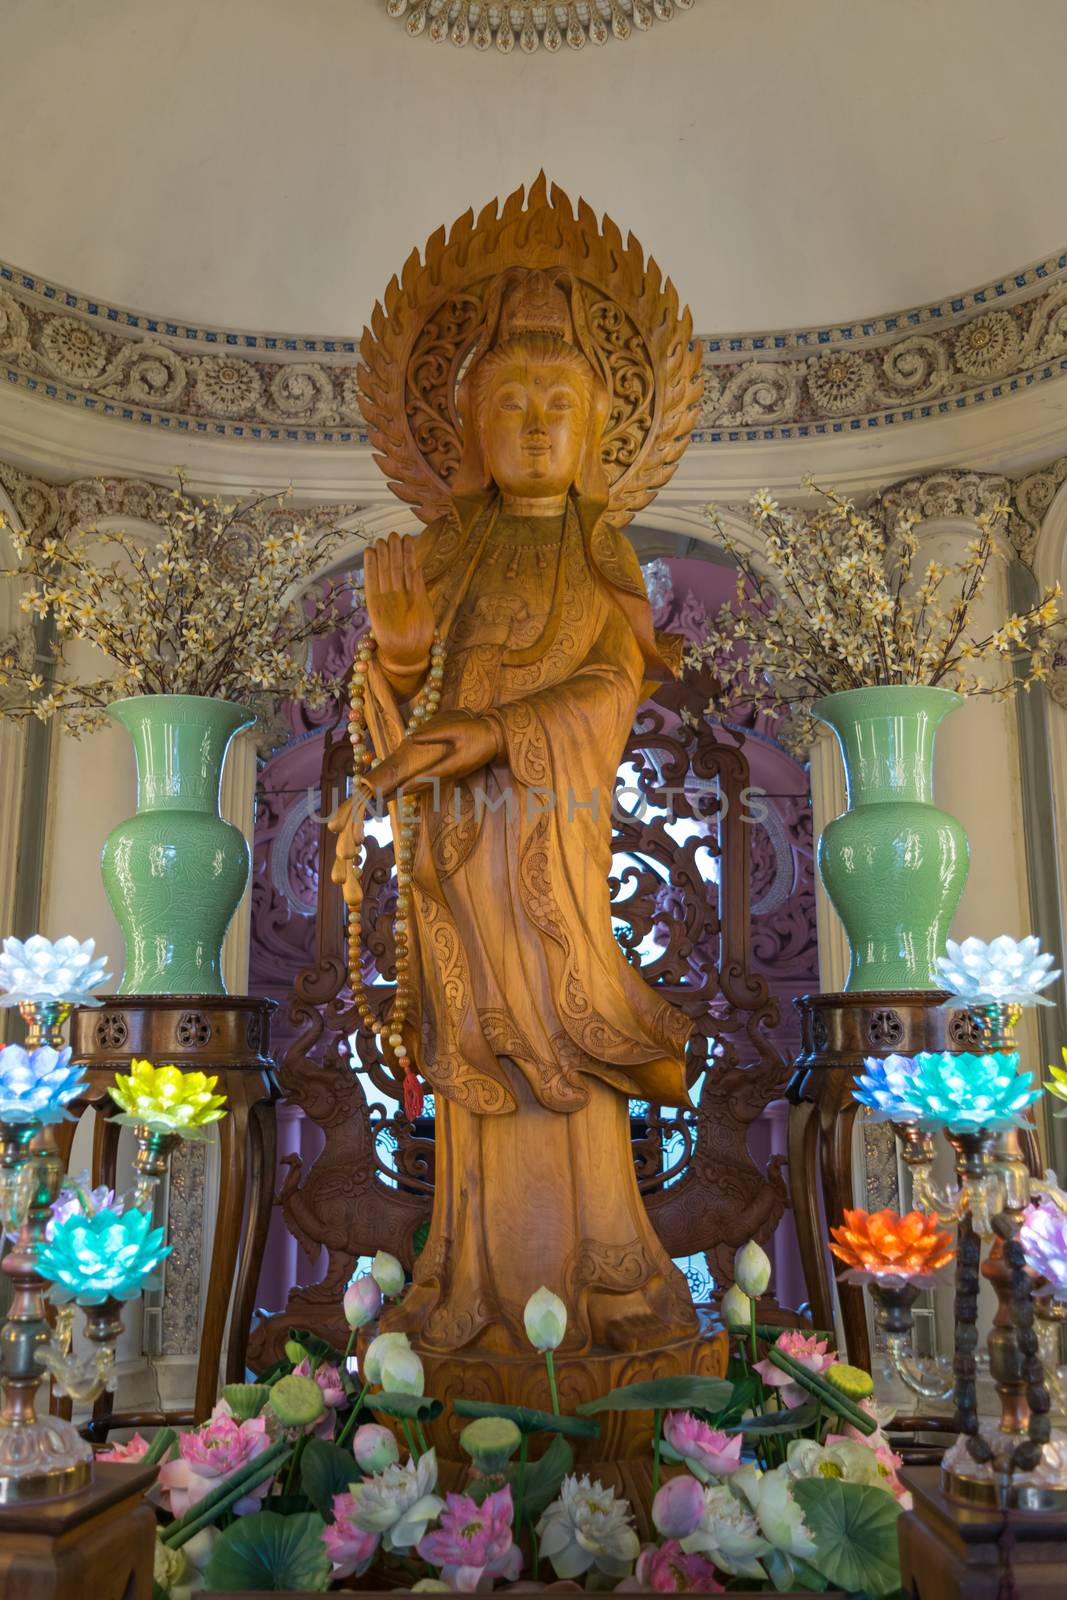 Samut Prakan, Thailand - March 19, 2016 : Guanyin statue at Erawan Museum is a museum in Samut Prakan, Thailand. It is well known for its giant three-headed elephant art display.